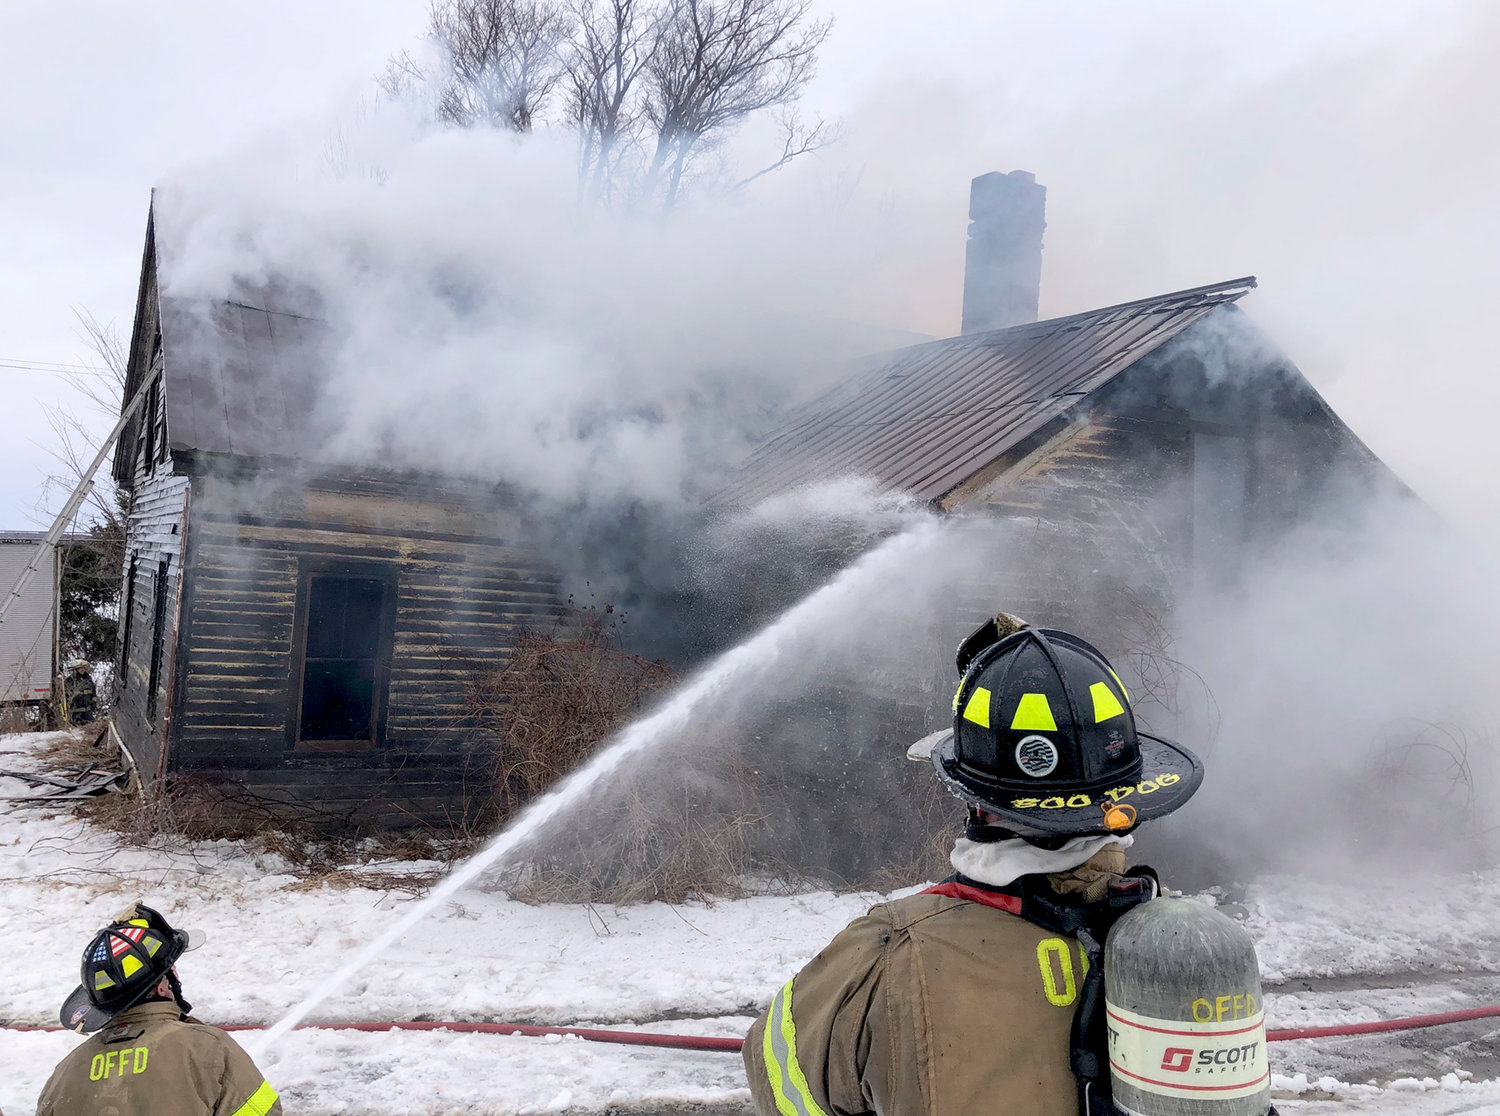 Firefighters from Oriskany Falls douse a blaze at an abandoned home on Route 20 in the Town of Madison Tuesday afternoon.